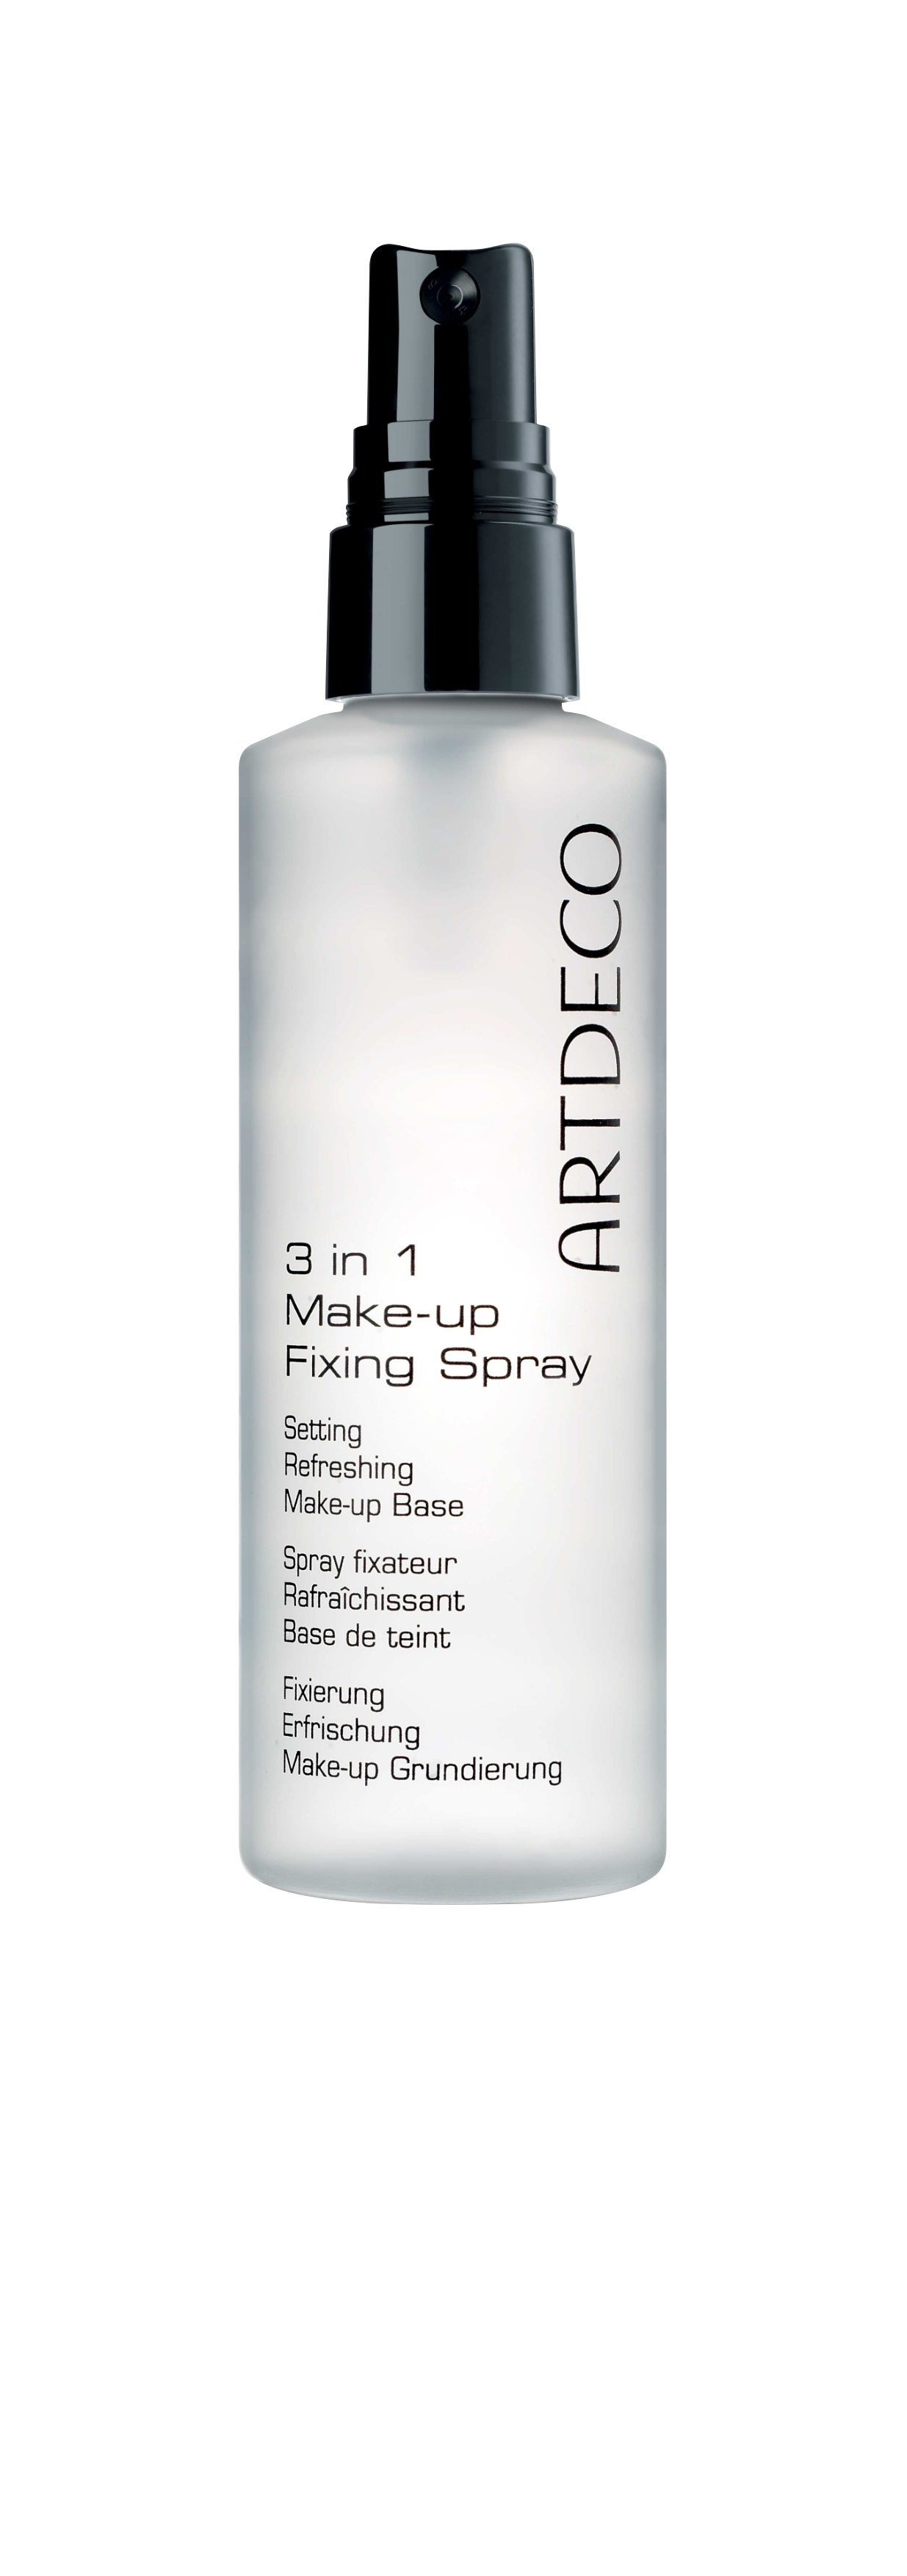 3 in 1 Make Up Fixing Spray